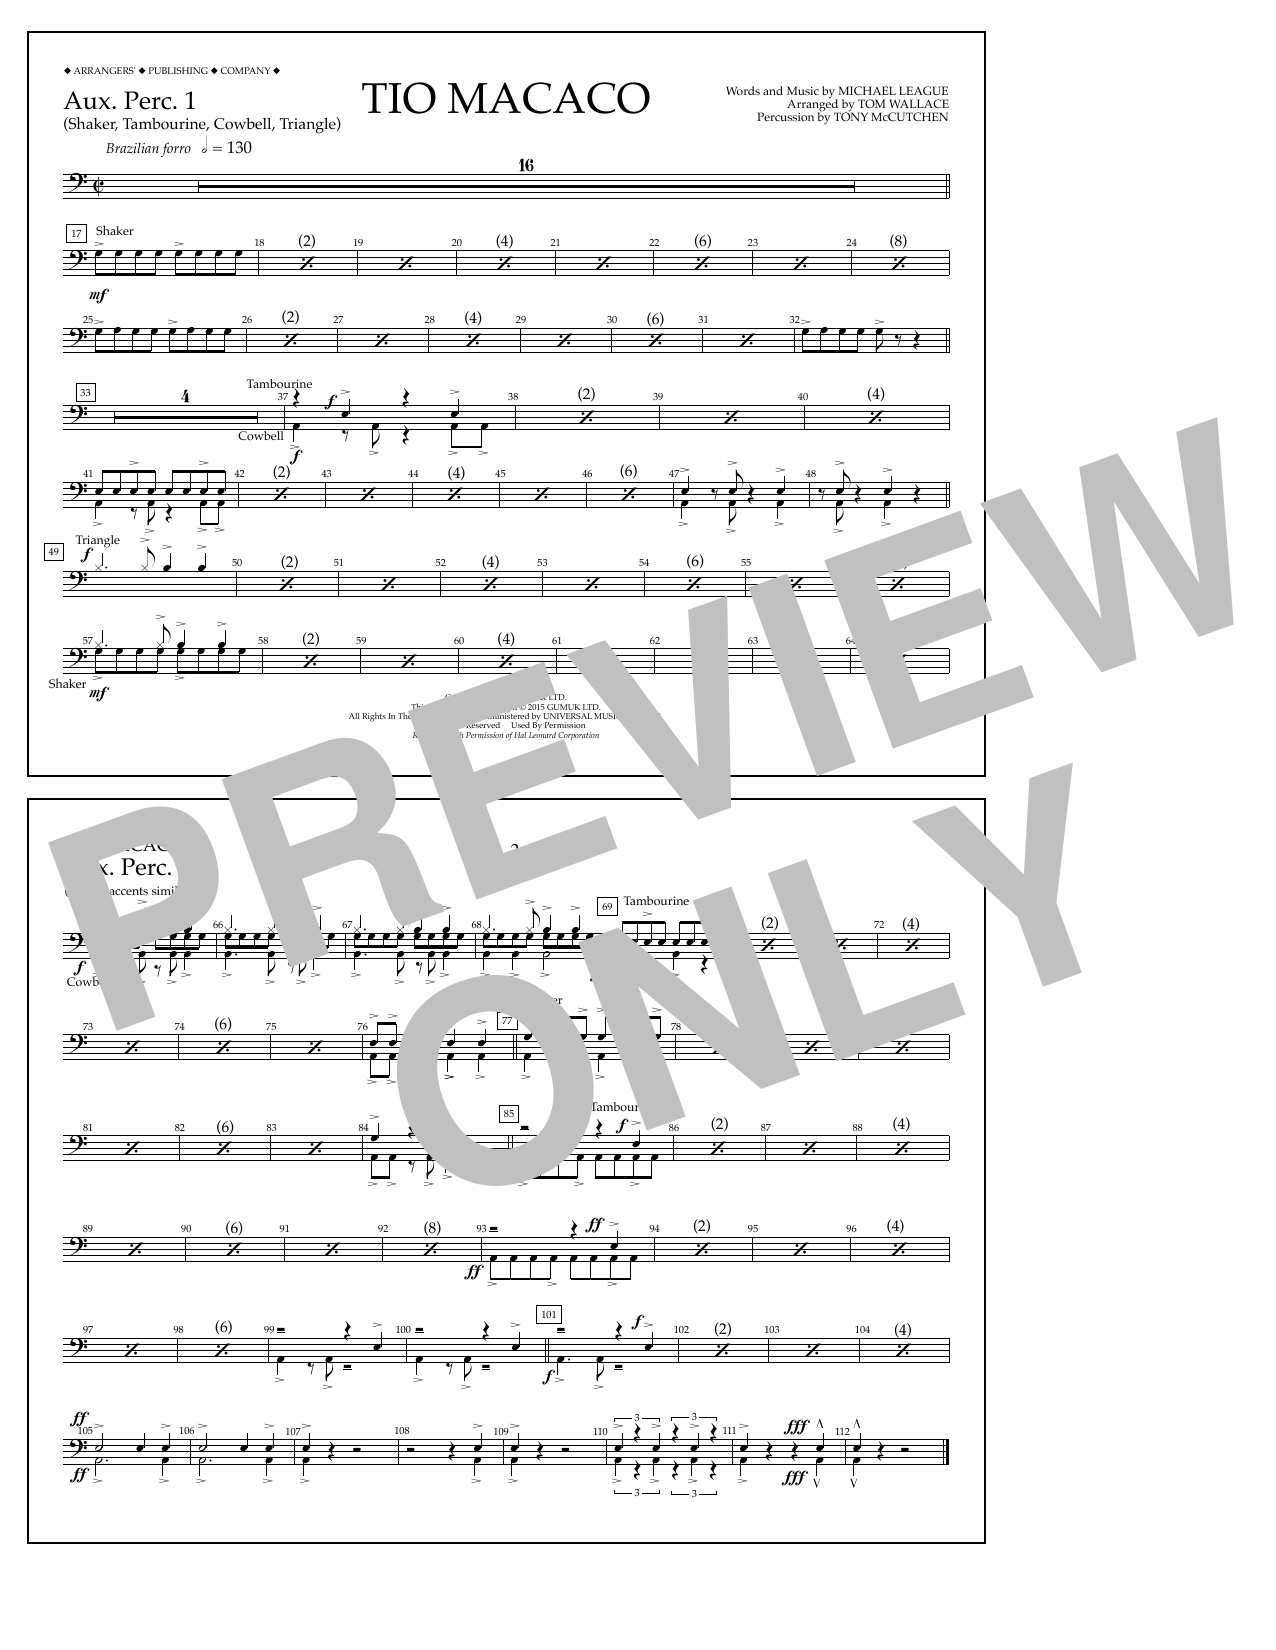 Download Tom Wallace Tio Macaco - Aux. Perc. 1 Sheet Music